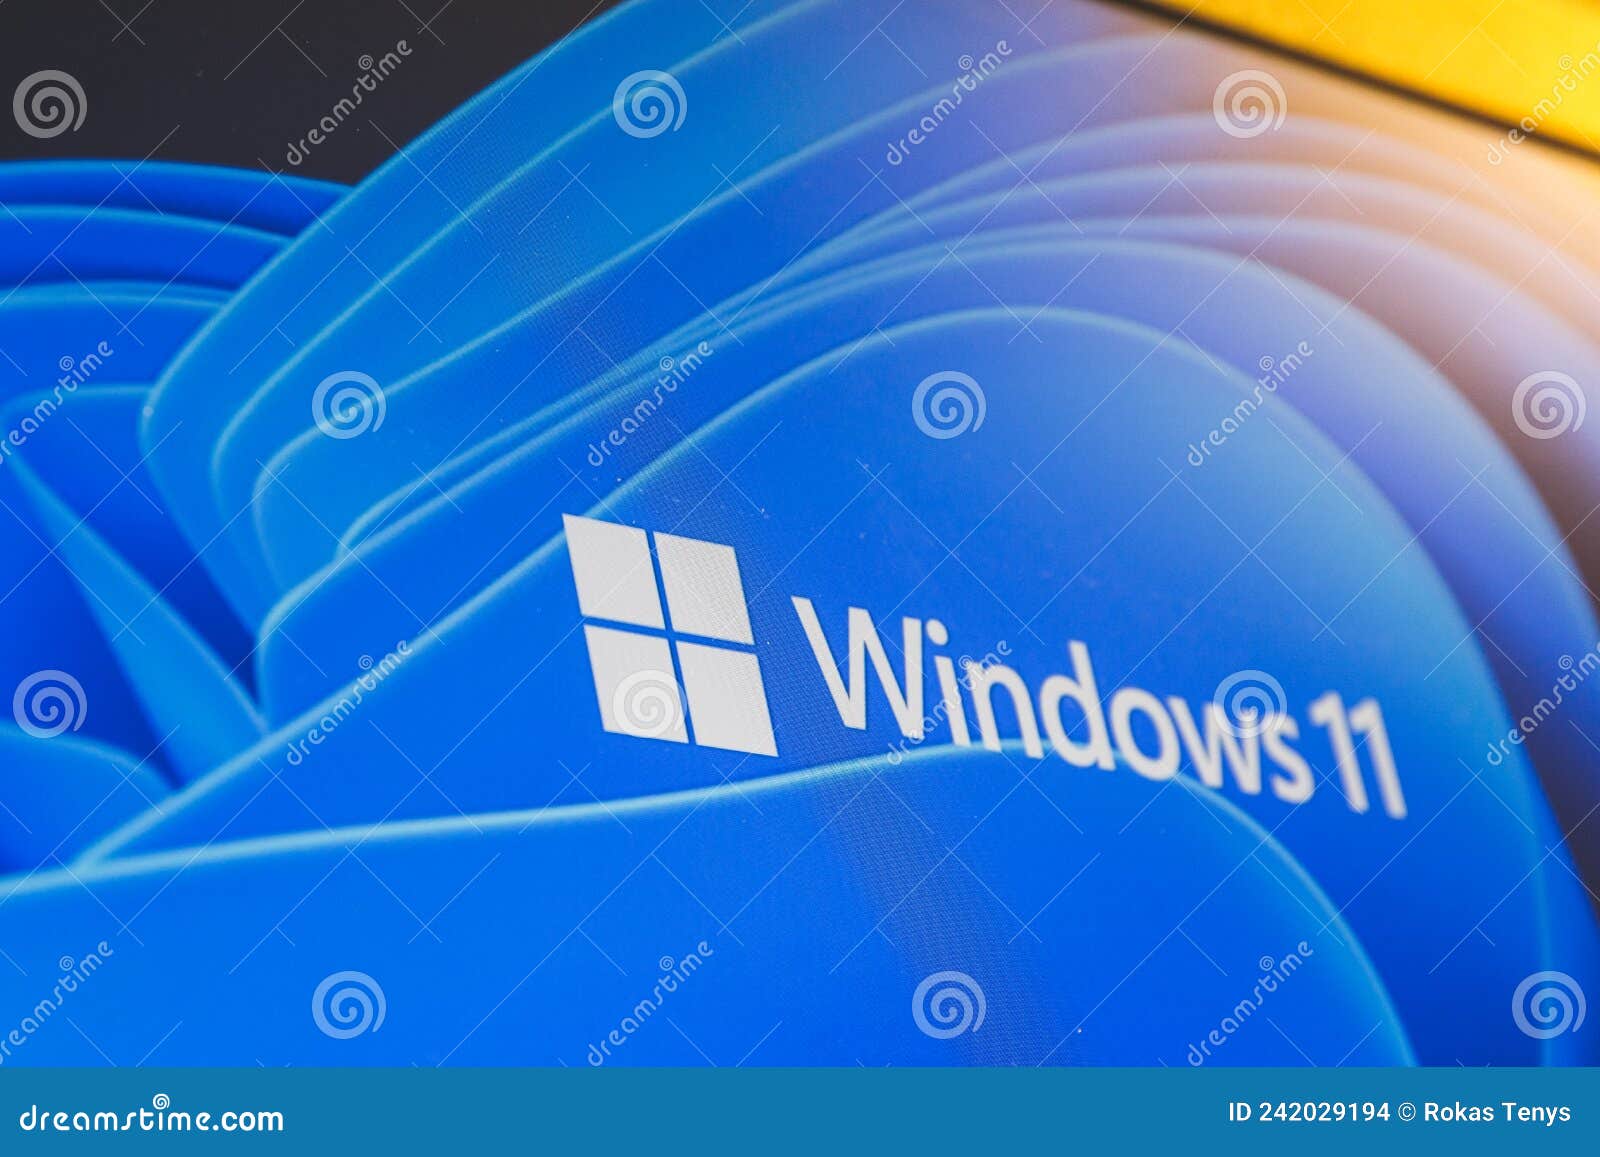 Windows 11 Operating System On Pc Screen Windows 11 Is The Latest